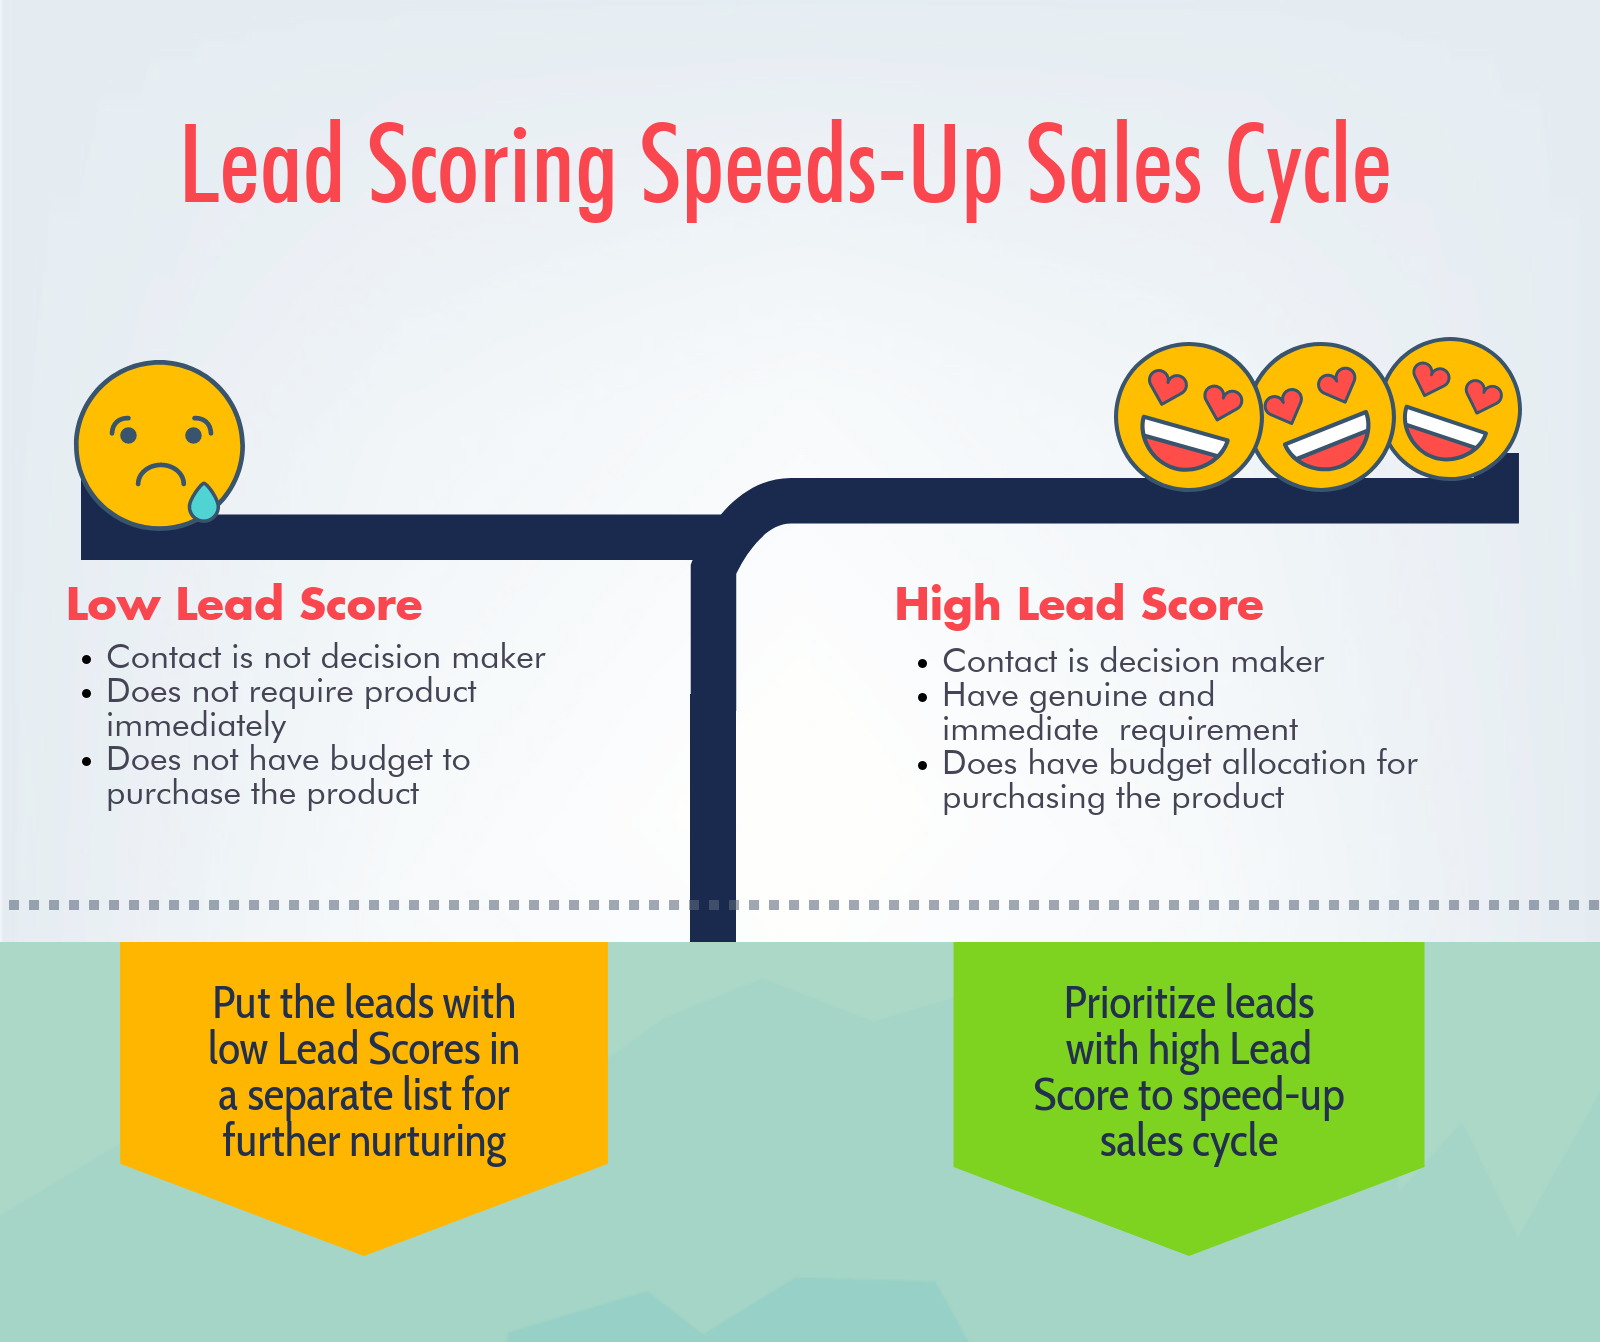 Lead Scoring to speed-up sales cycle